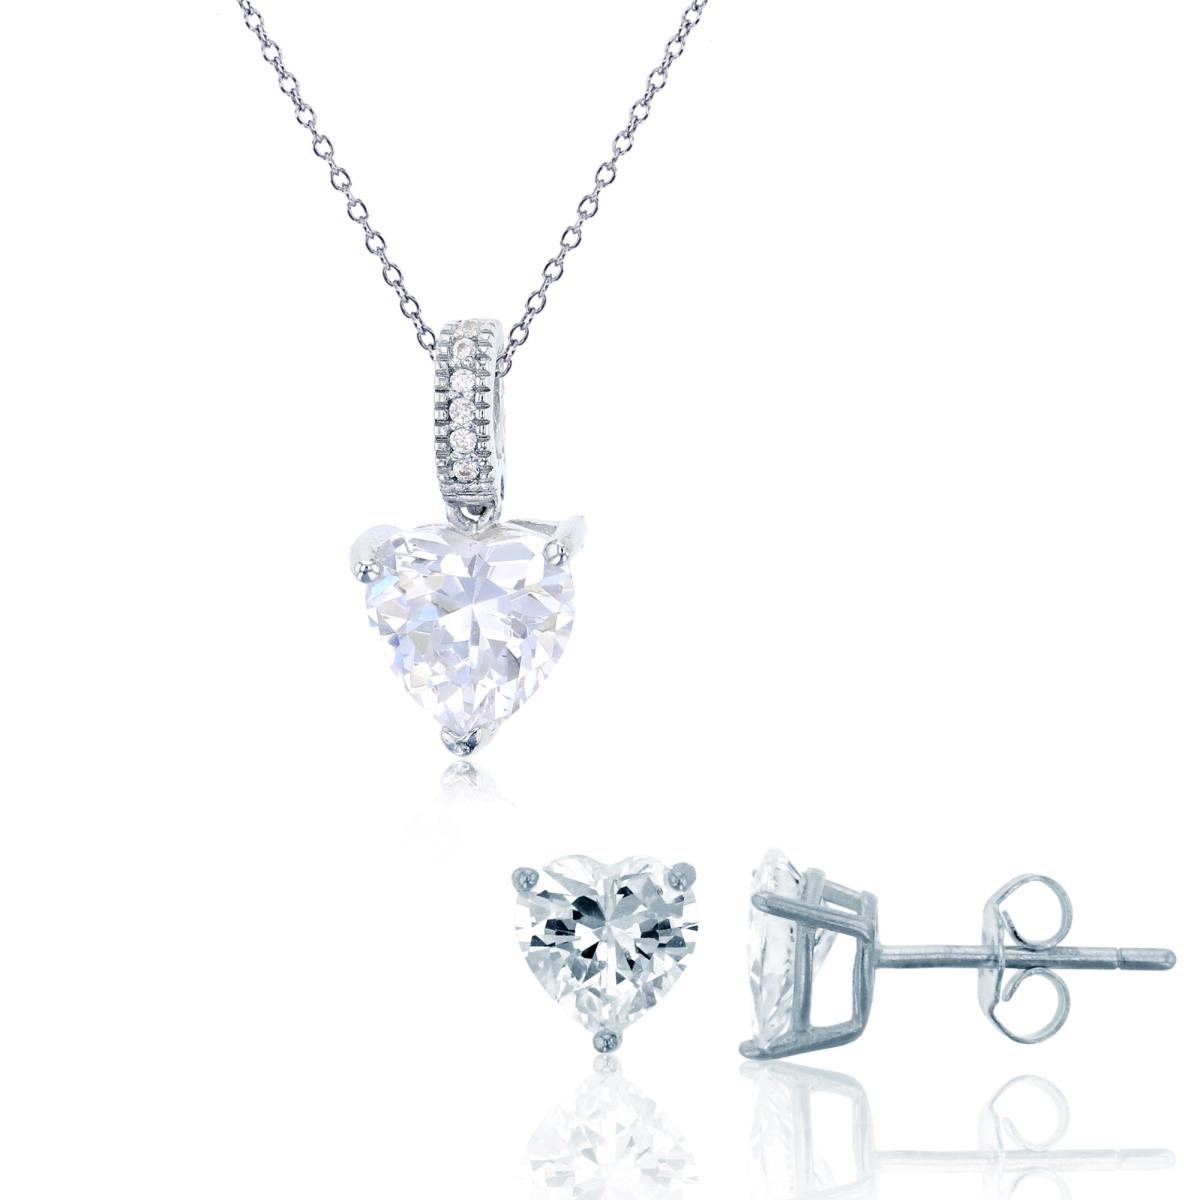 Sterling Silver Rhodium 8mm Heart Cut & Rd CZ 18" Necklace & 6mm Heart Solitaire Stud Earring Set